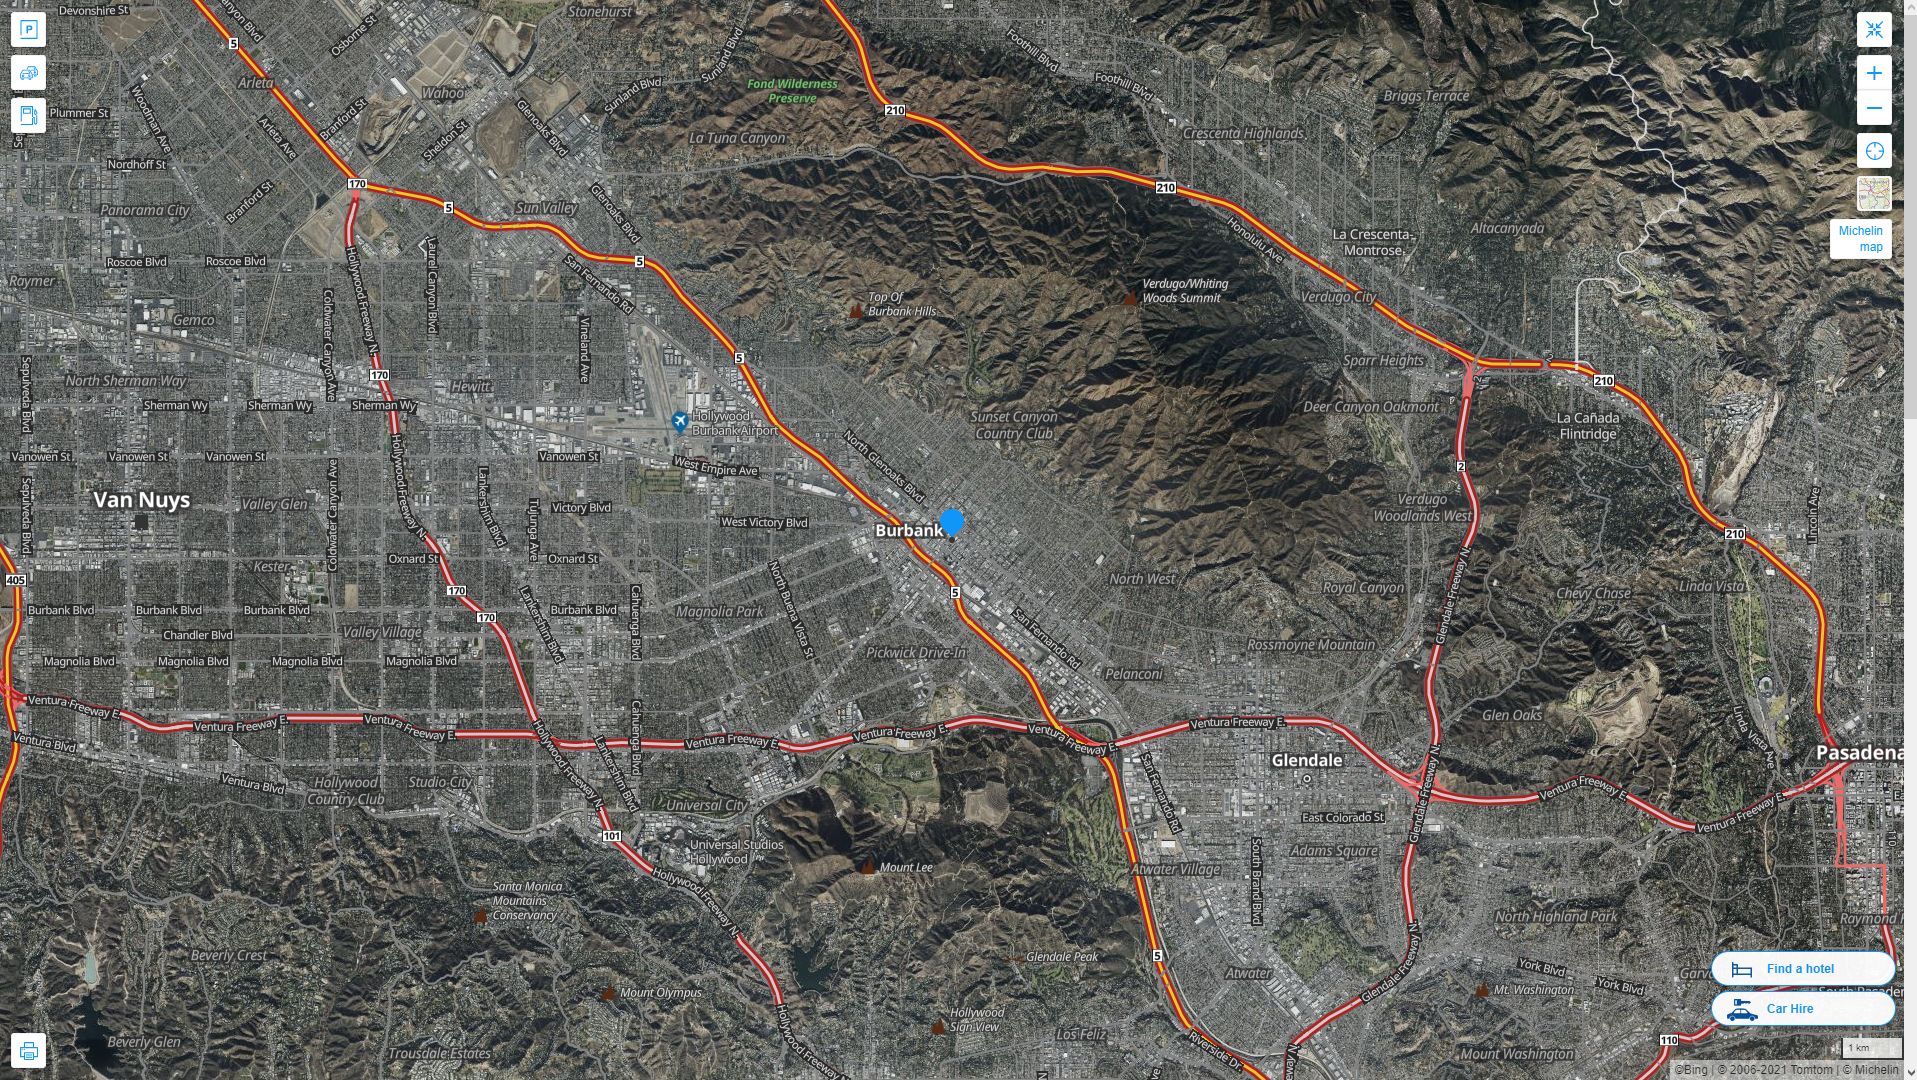 Burbank California Highway and Road Map with Satellite View